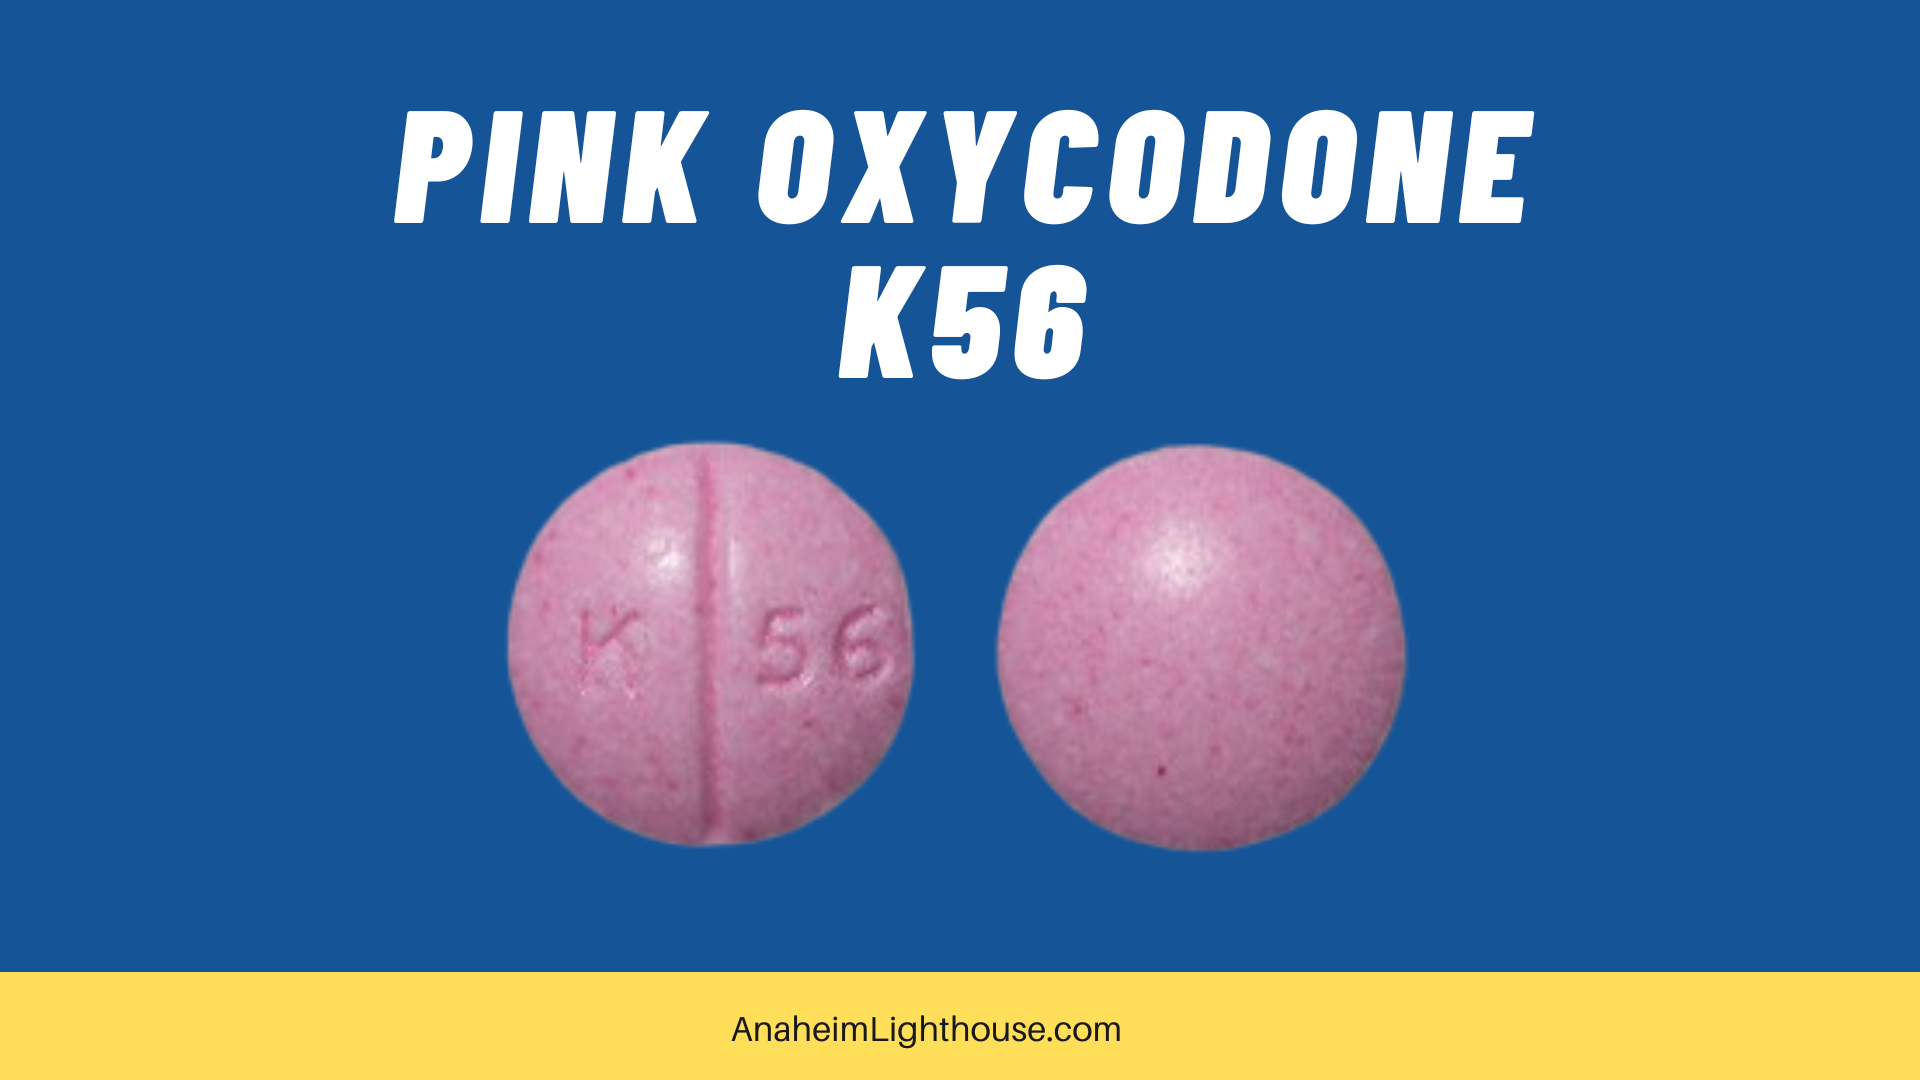 What Is Pink Oxycodone?